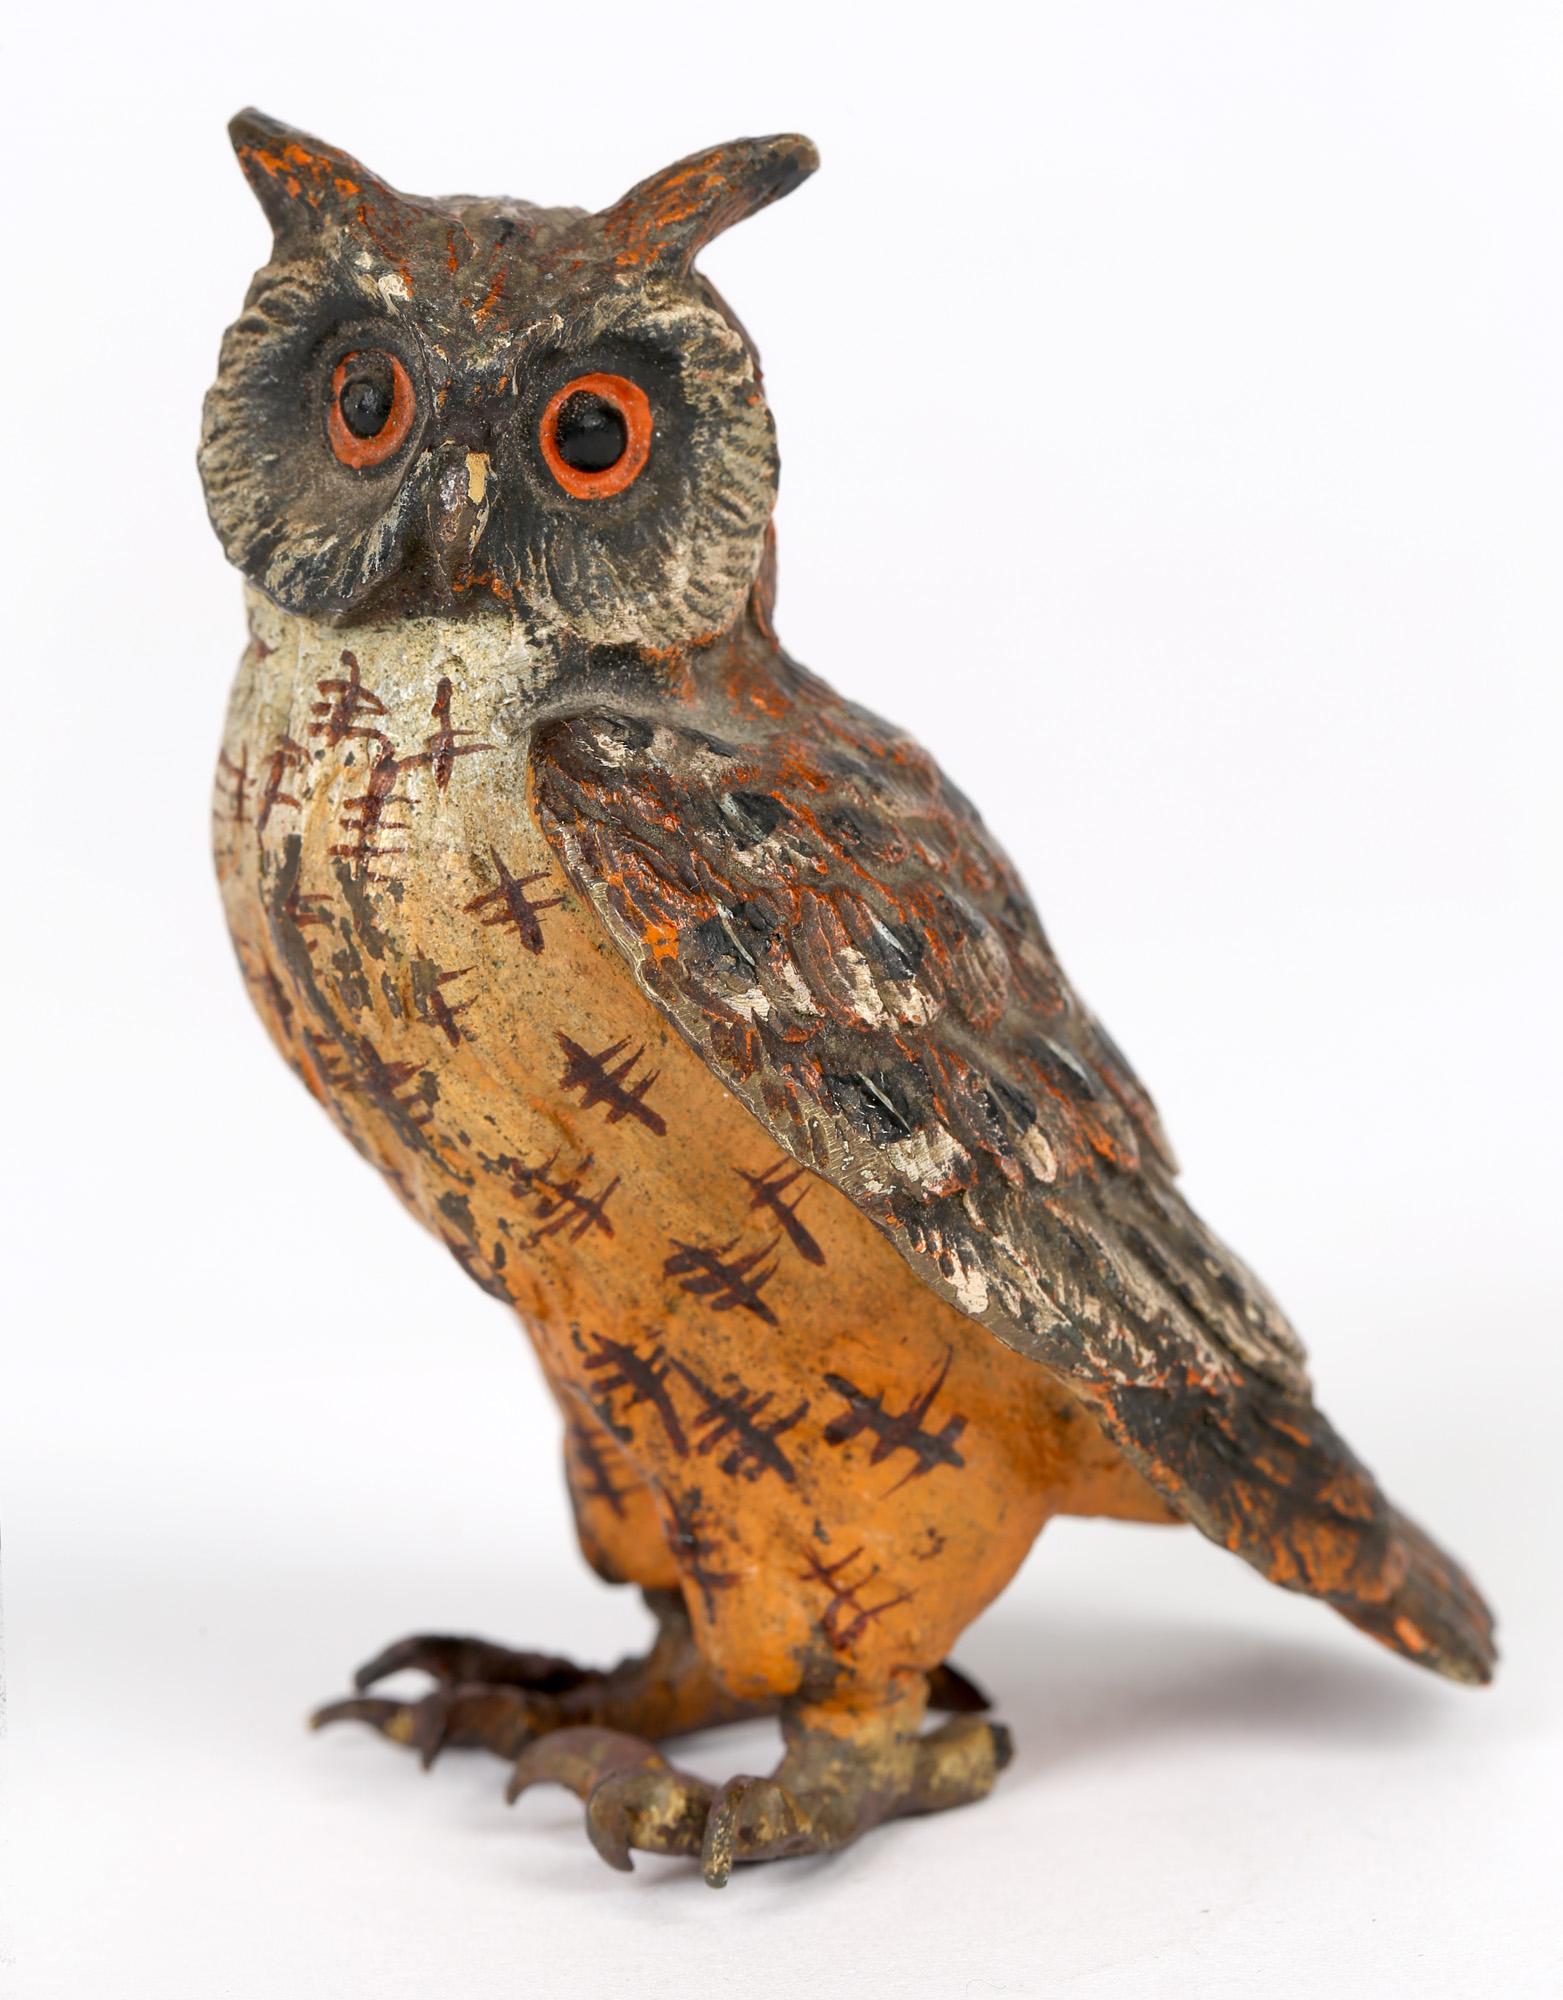 A very well made Austrian Vienna cold painted bronze figure of an owl attributed to Franz Bergman and dating from around 1900. The owl stands glancing sideways and is very well hand decorated in naturalistic colors and detail with large black and